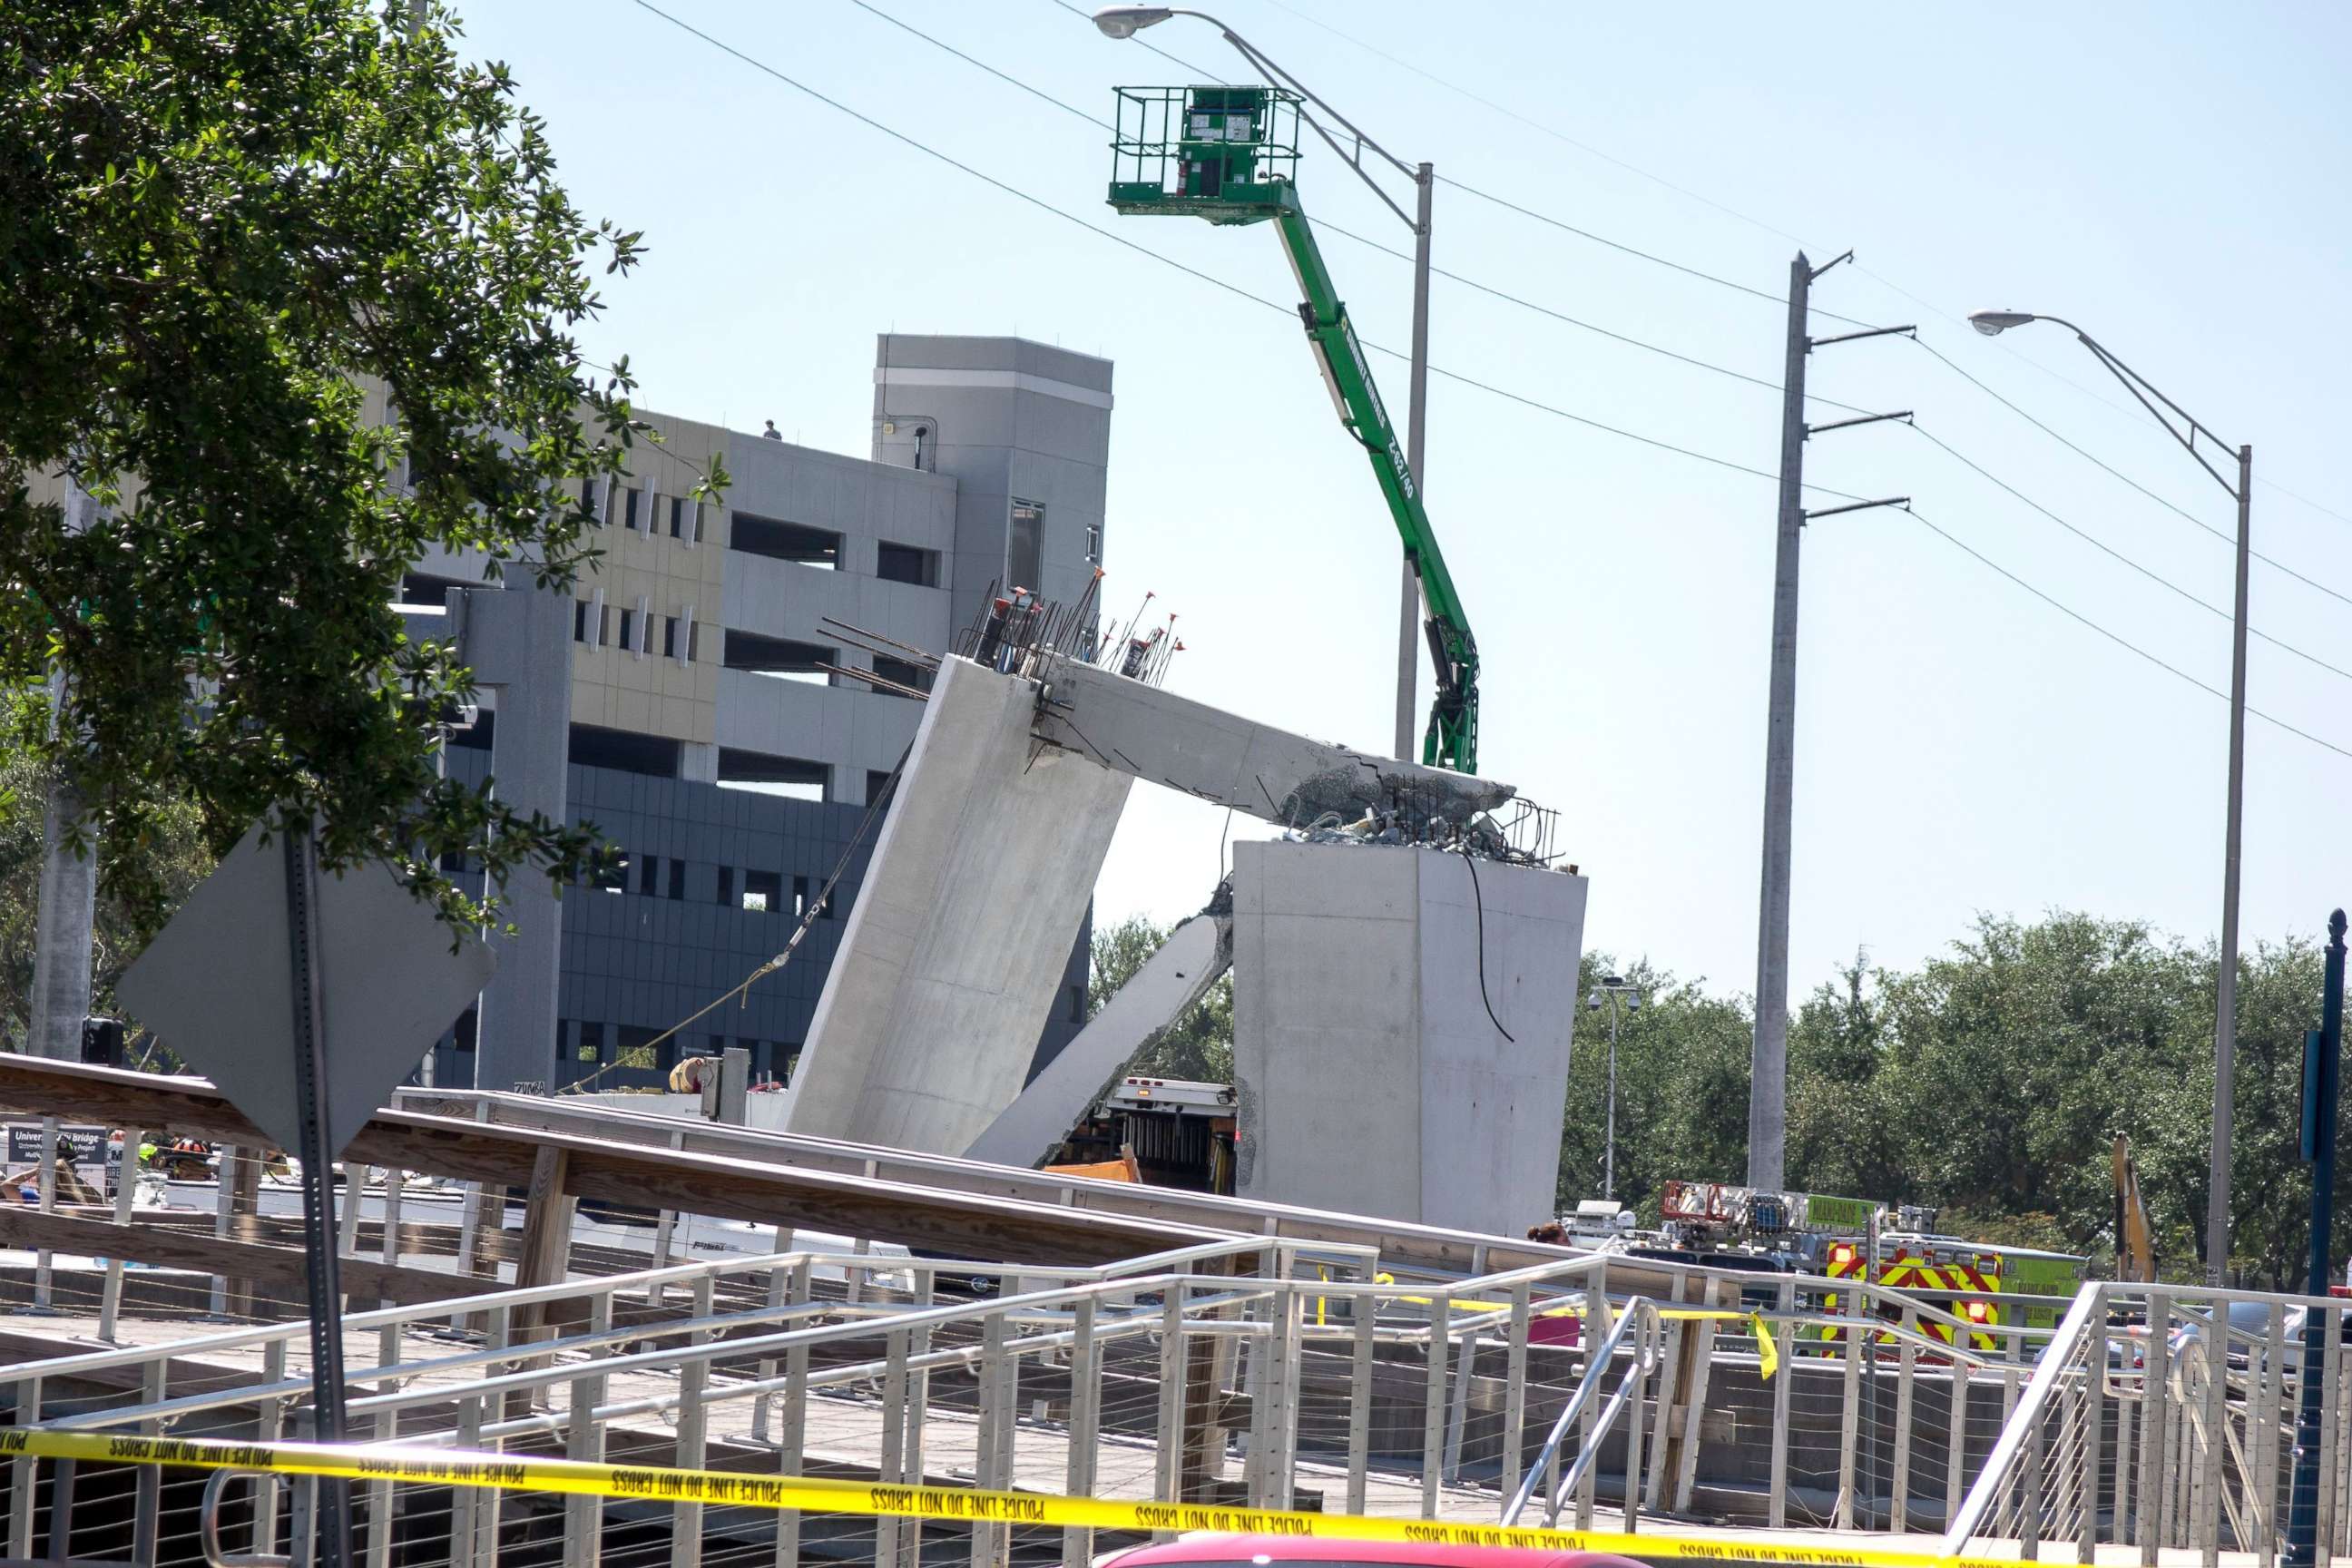 PHOTO: A pedestrian bridge collapsed at the Florida International University in Miami on March 15, 2018.